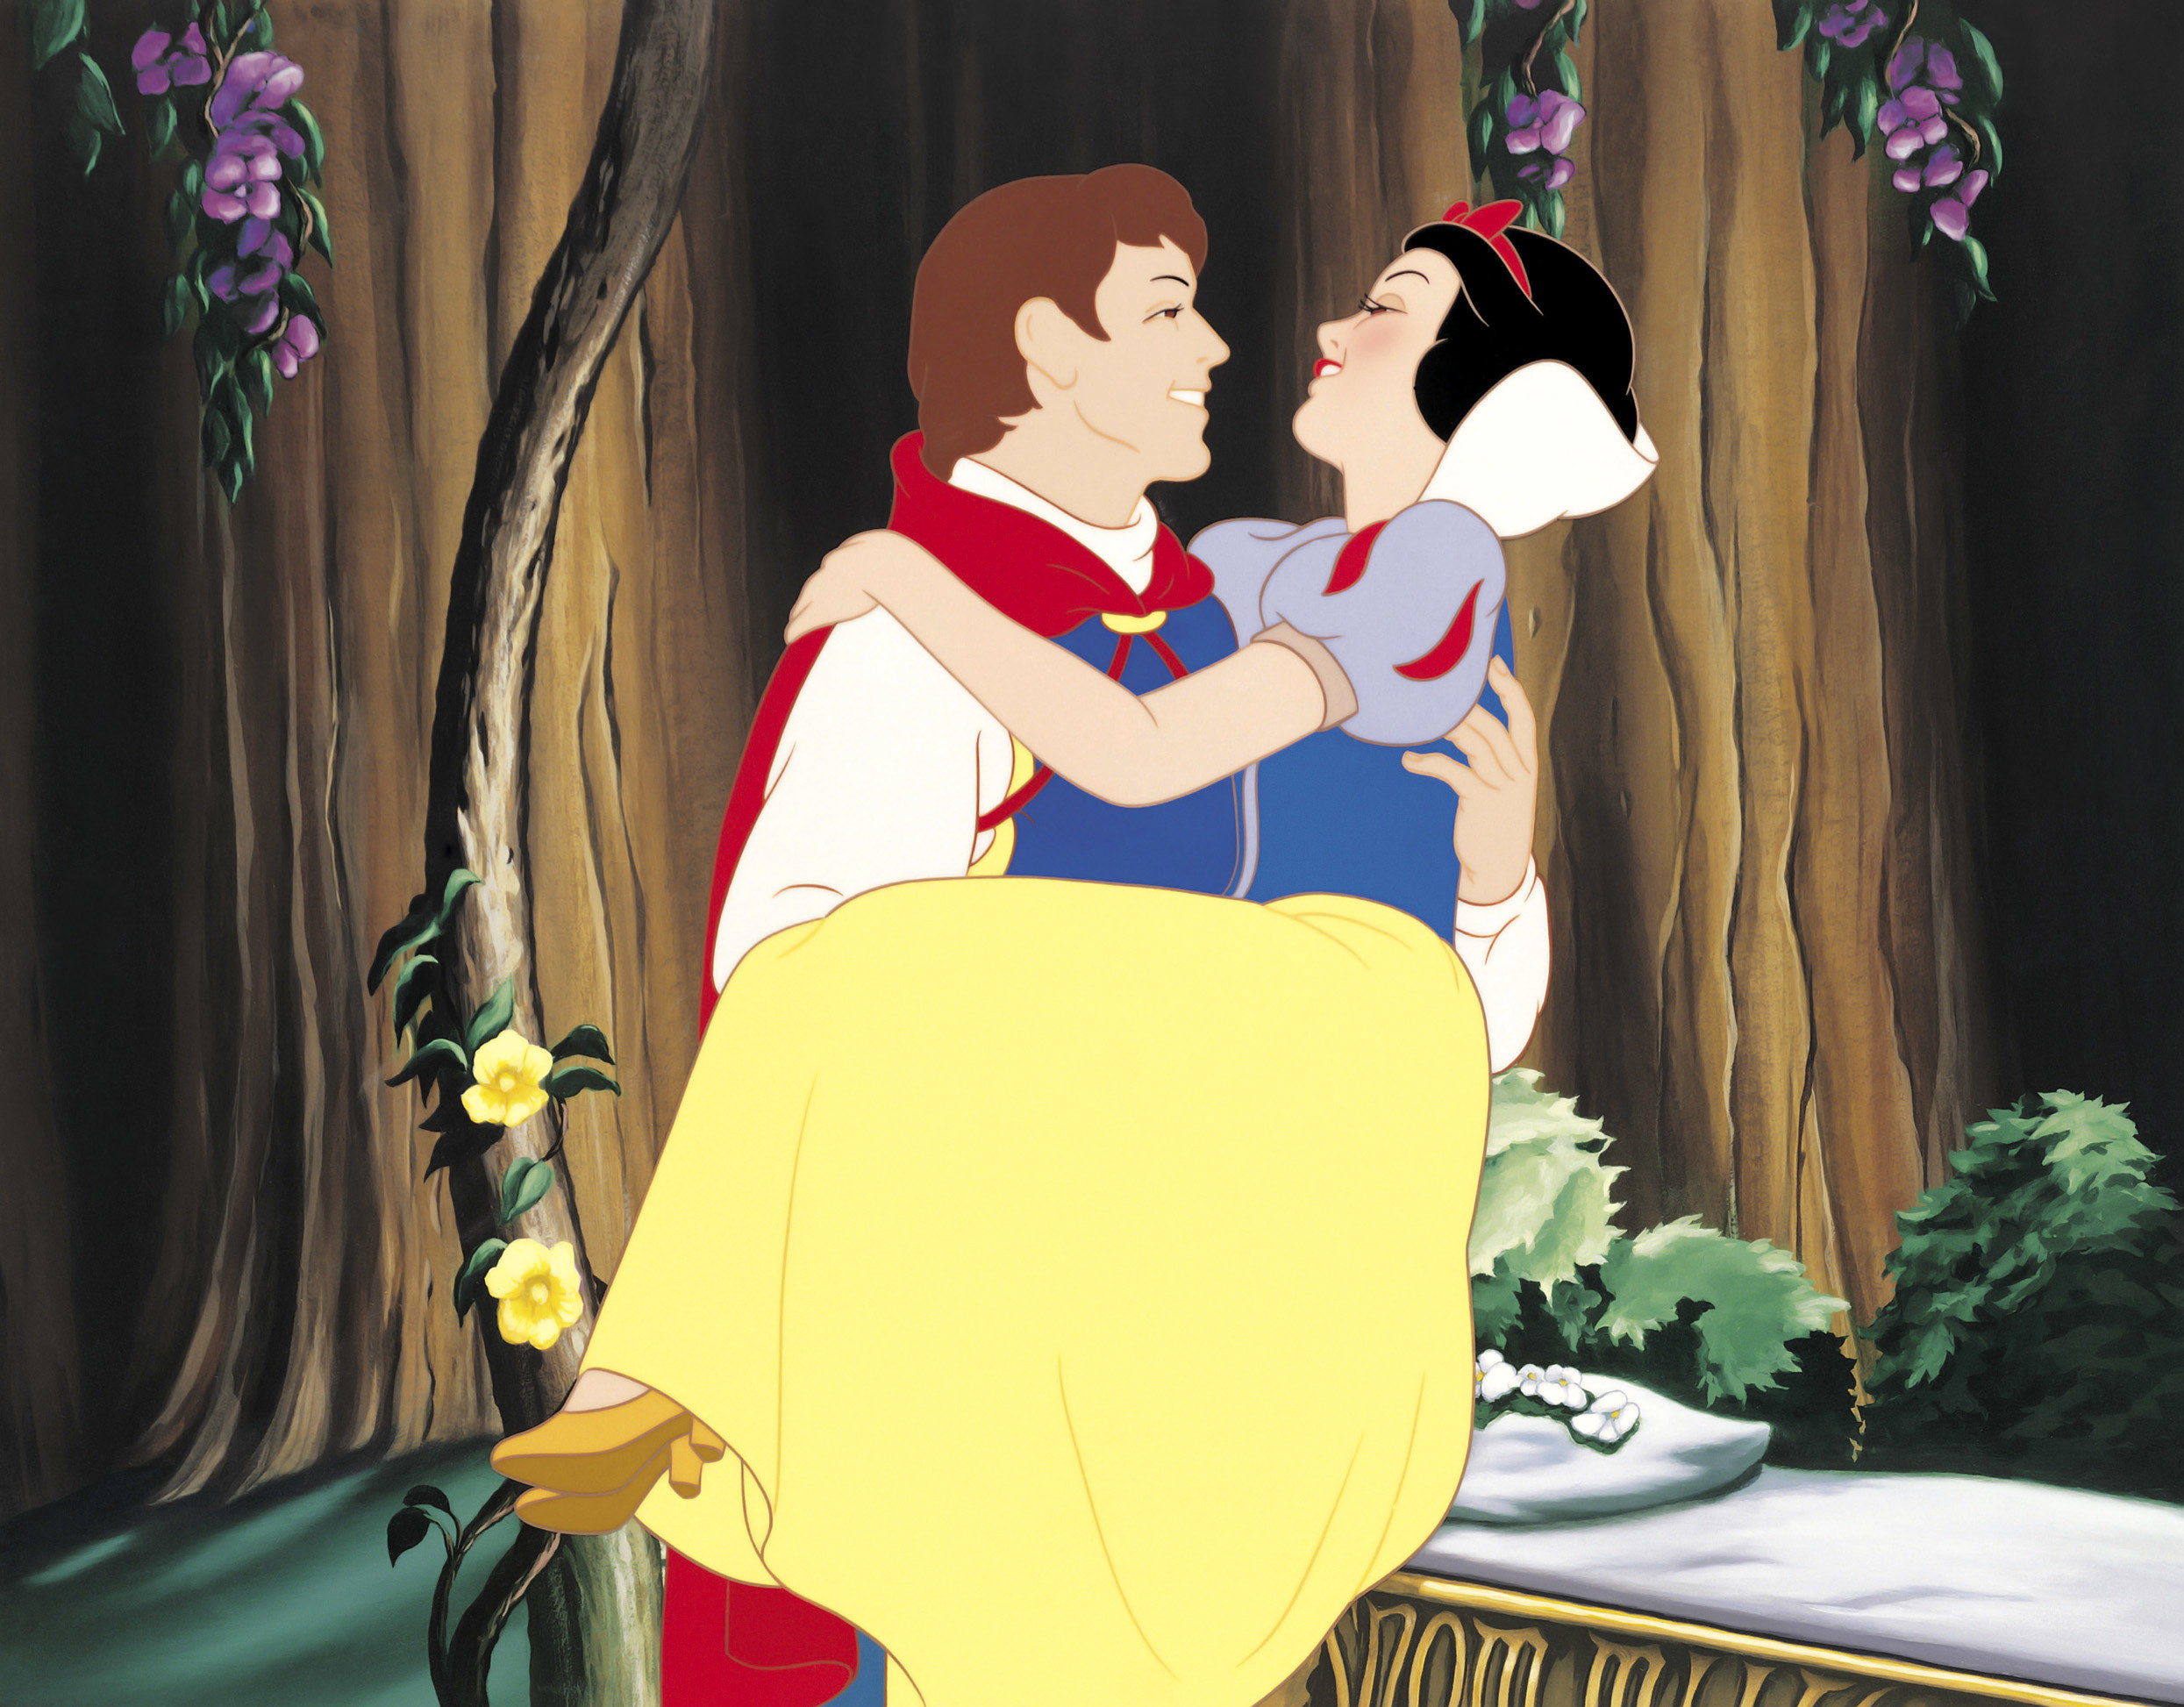 Prince Charming carrying Snow White